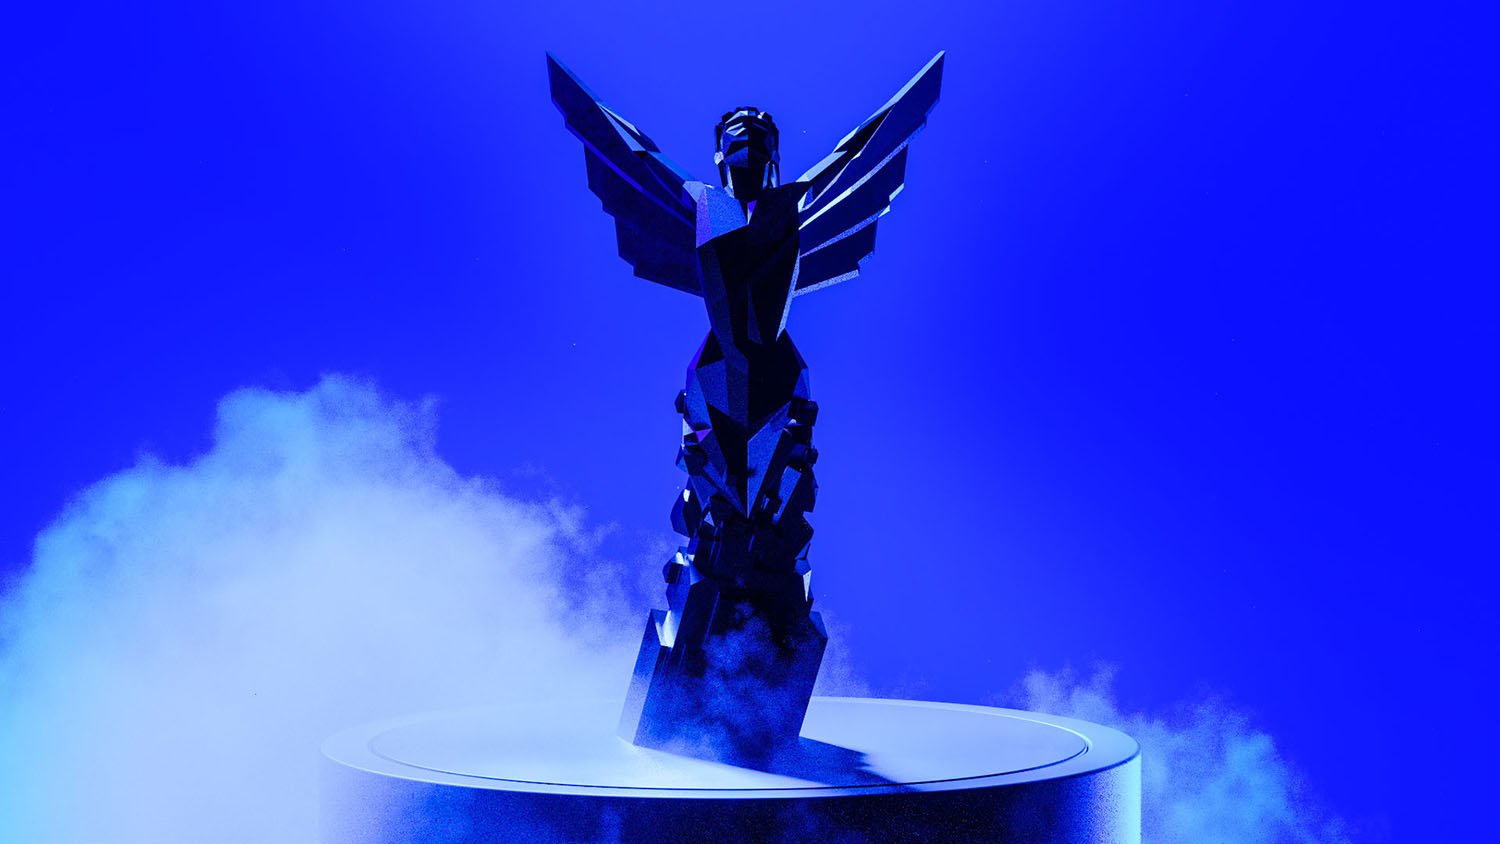 The Game Awards 2021 trophy against a blue background